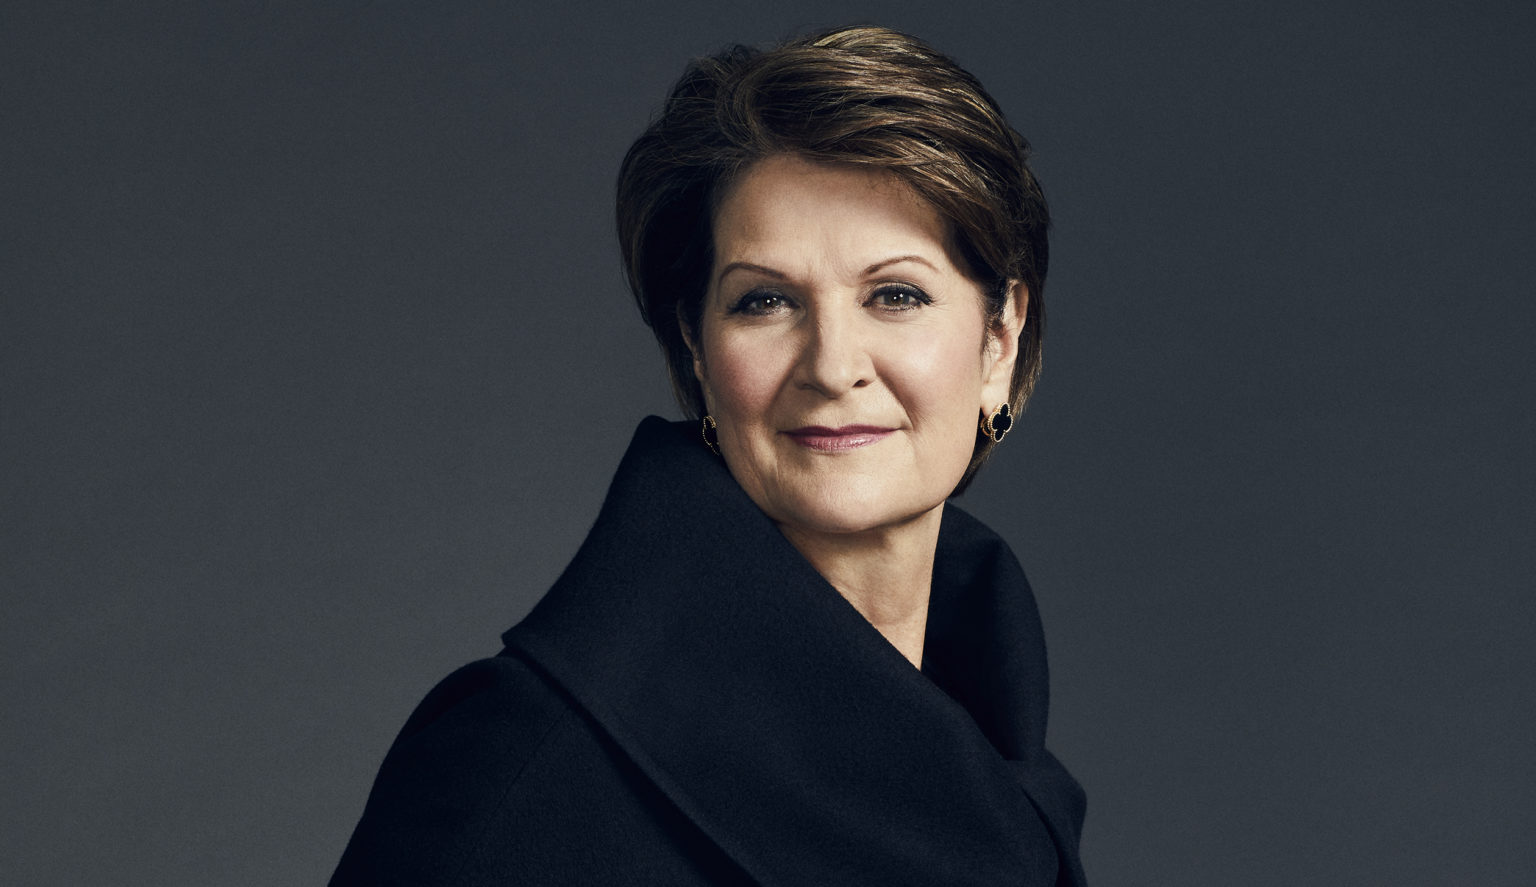 Marillyn Hewson is on both Fortune’s and Forbes’ lists of Most Powerful Women